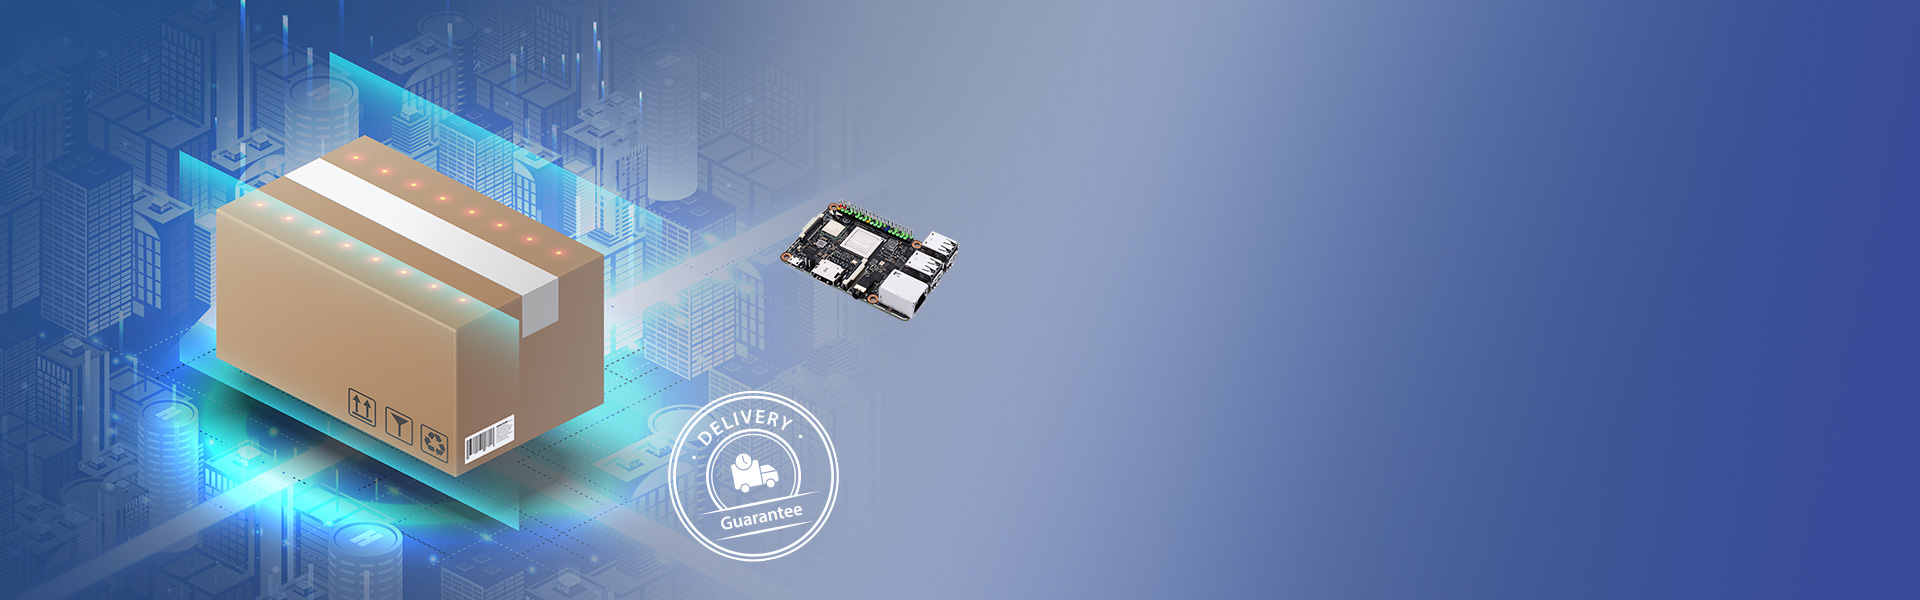 Tinker Board Series Ensures All-time Supply & On-time Delivery